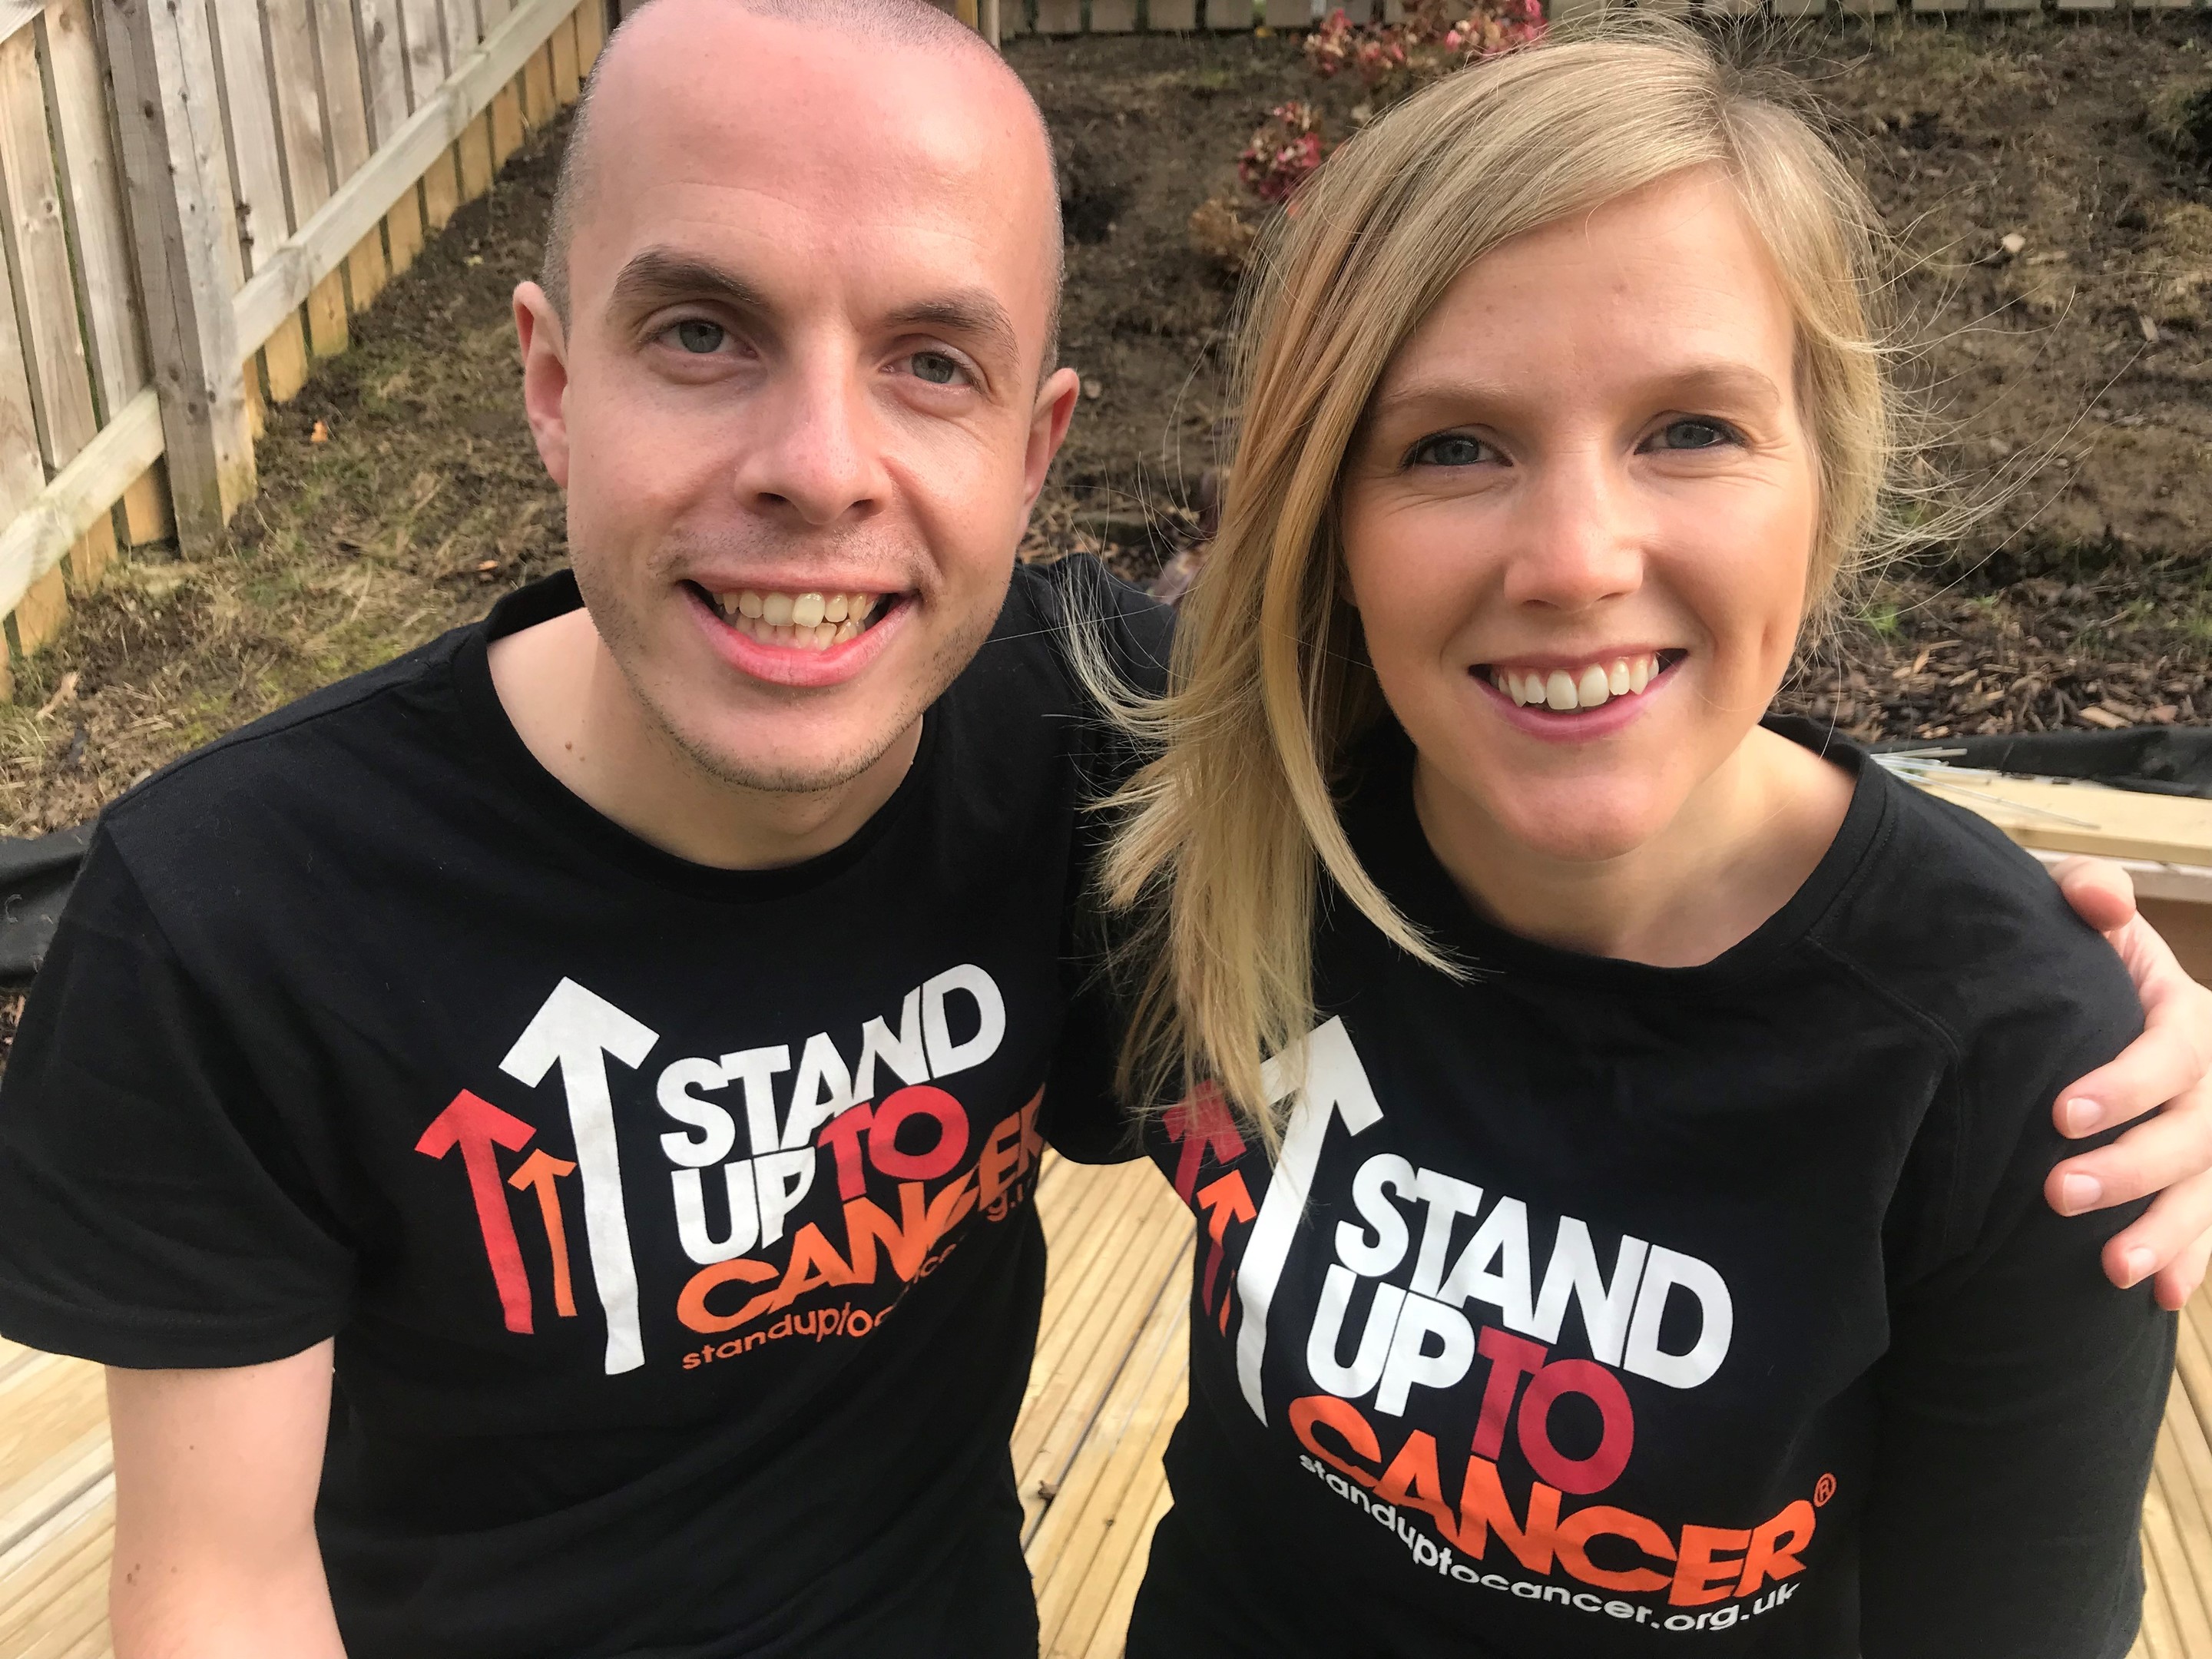 Craig is taking a swing at cancer to support Heather